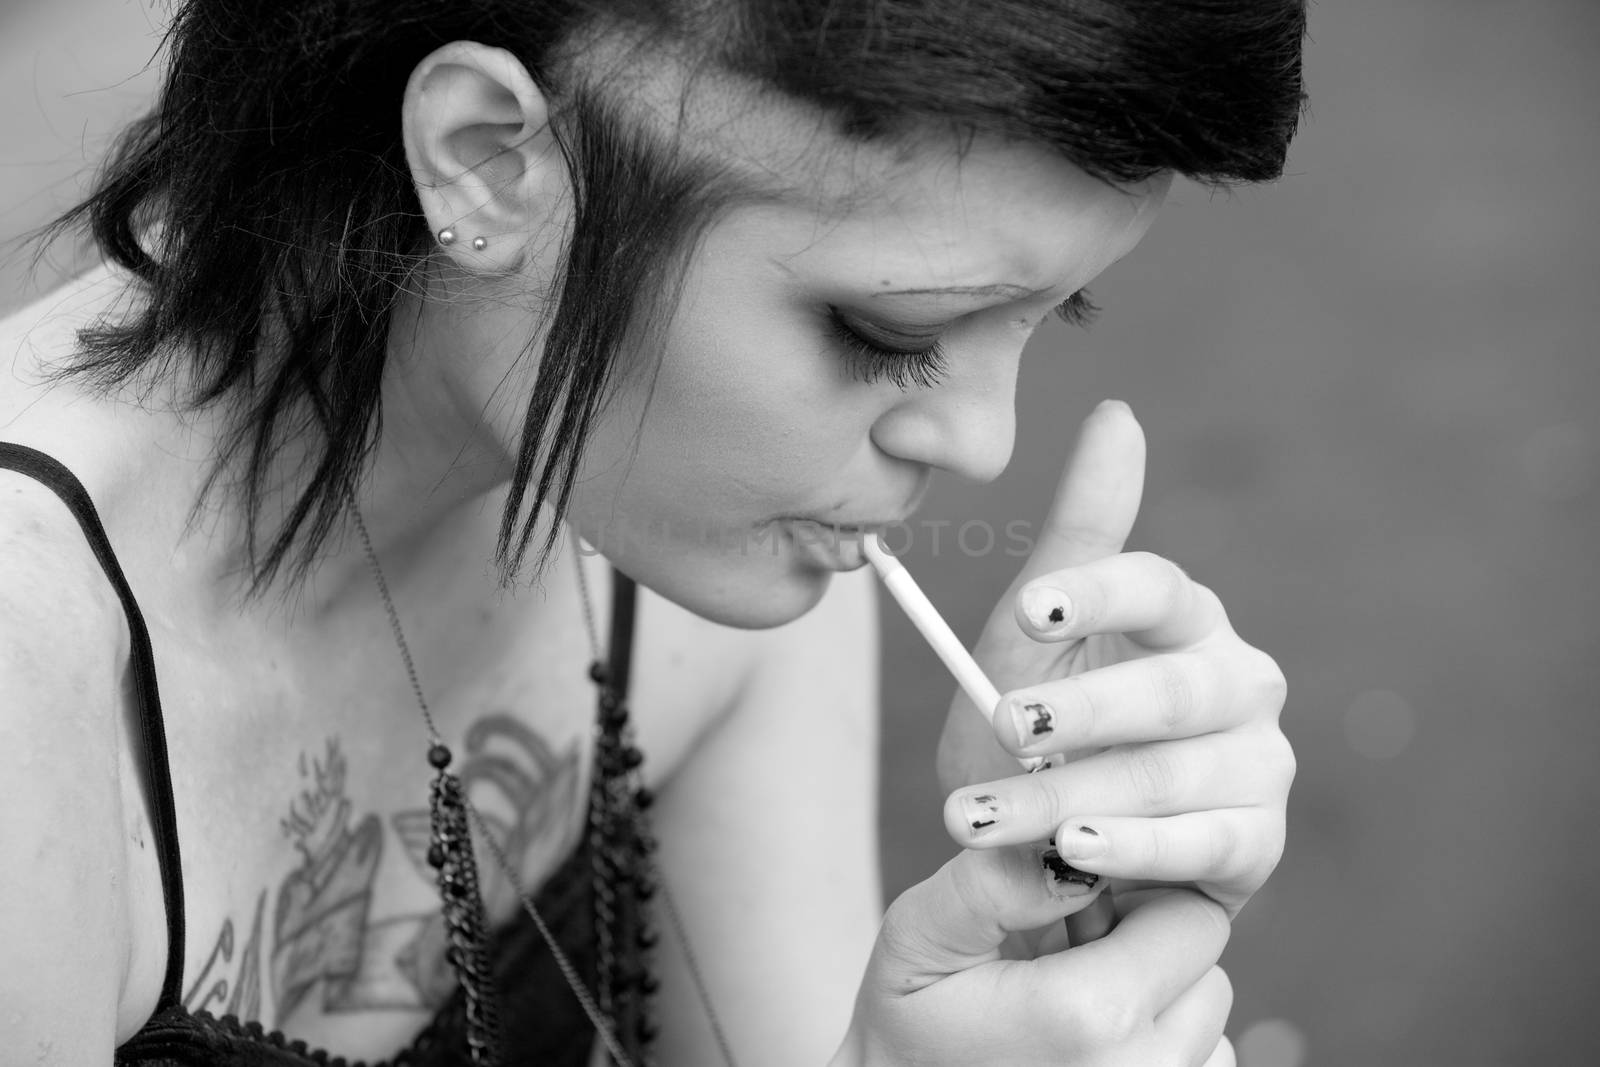 punk girl smokes a cigarette by Astroid